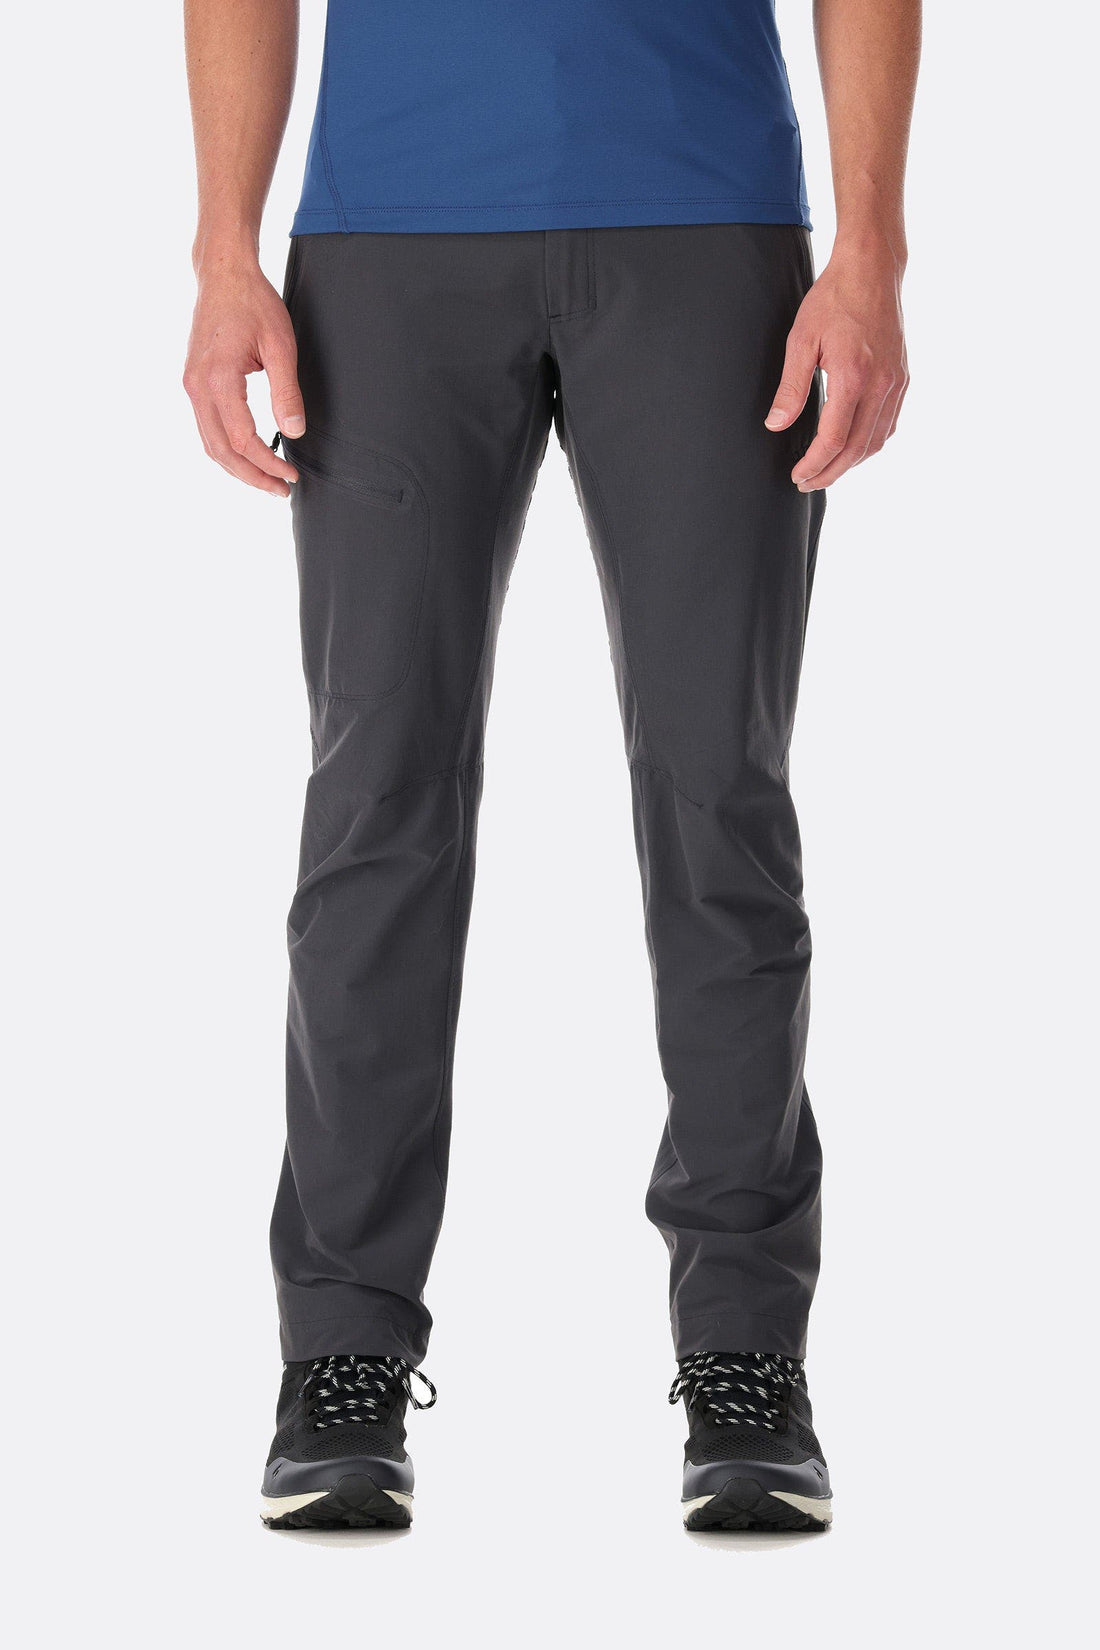 Incline Light Pants - Anthracite